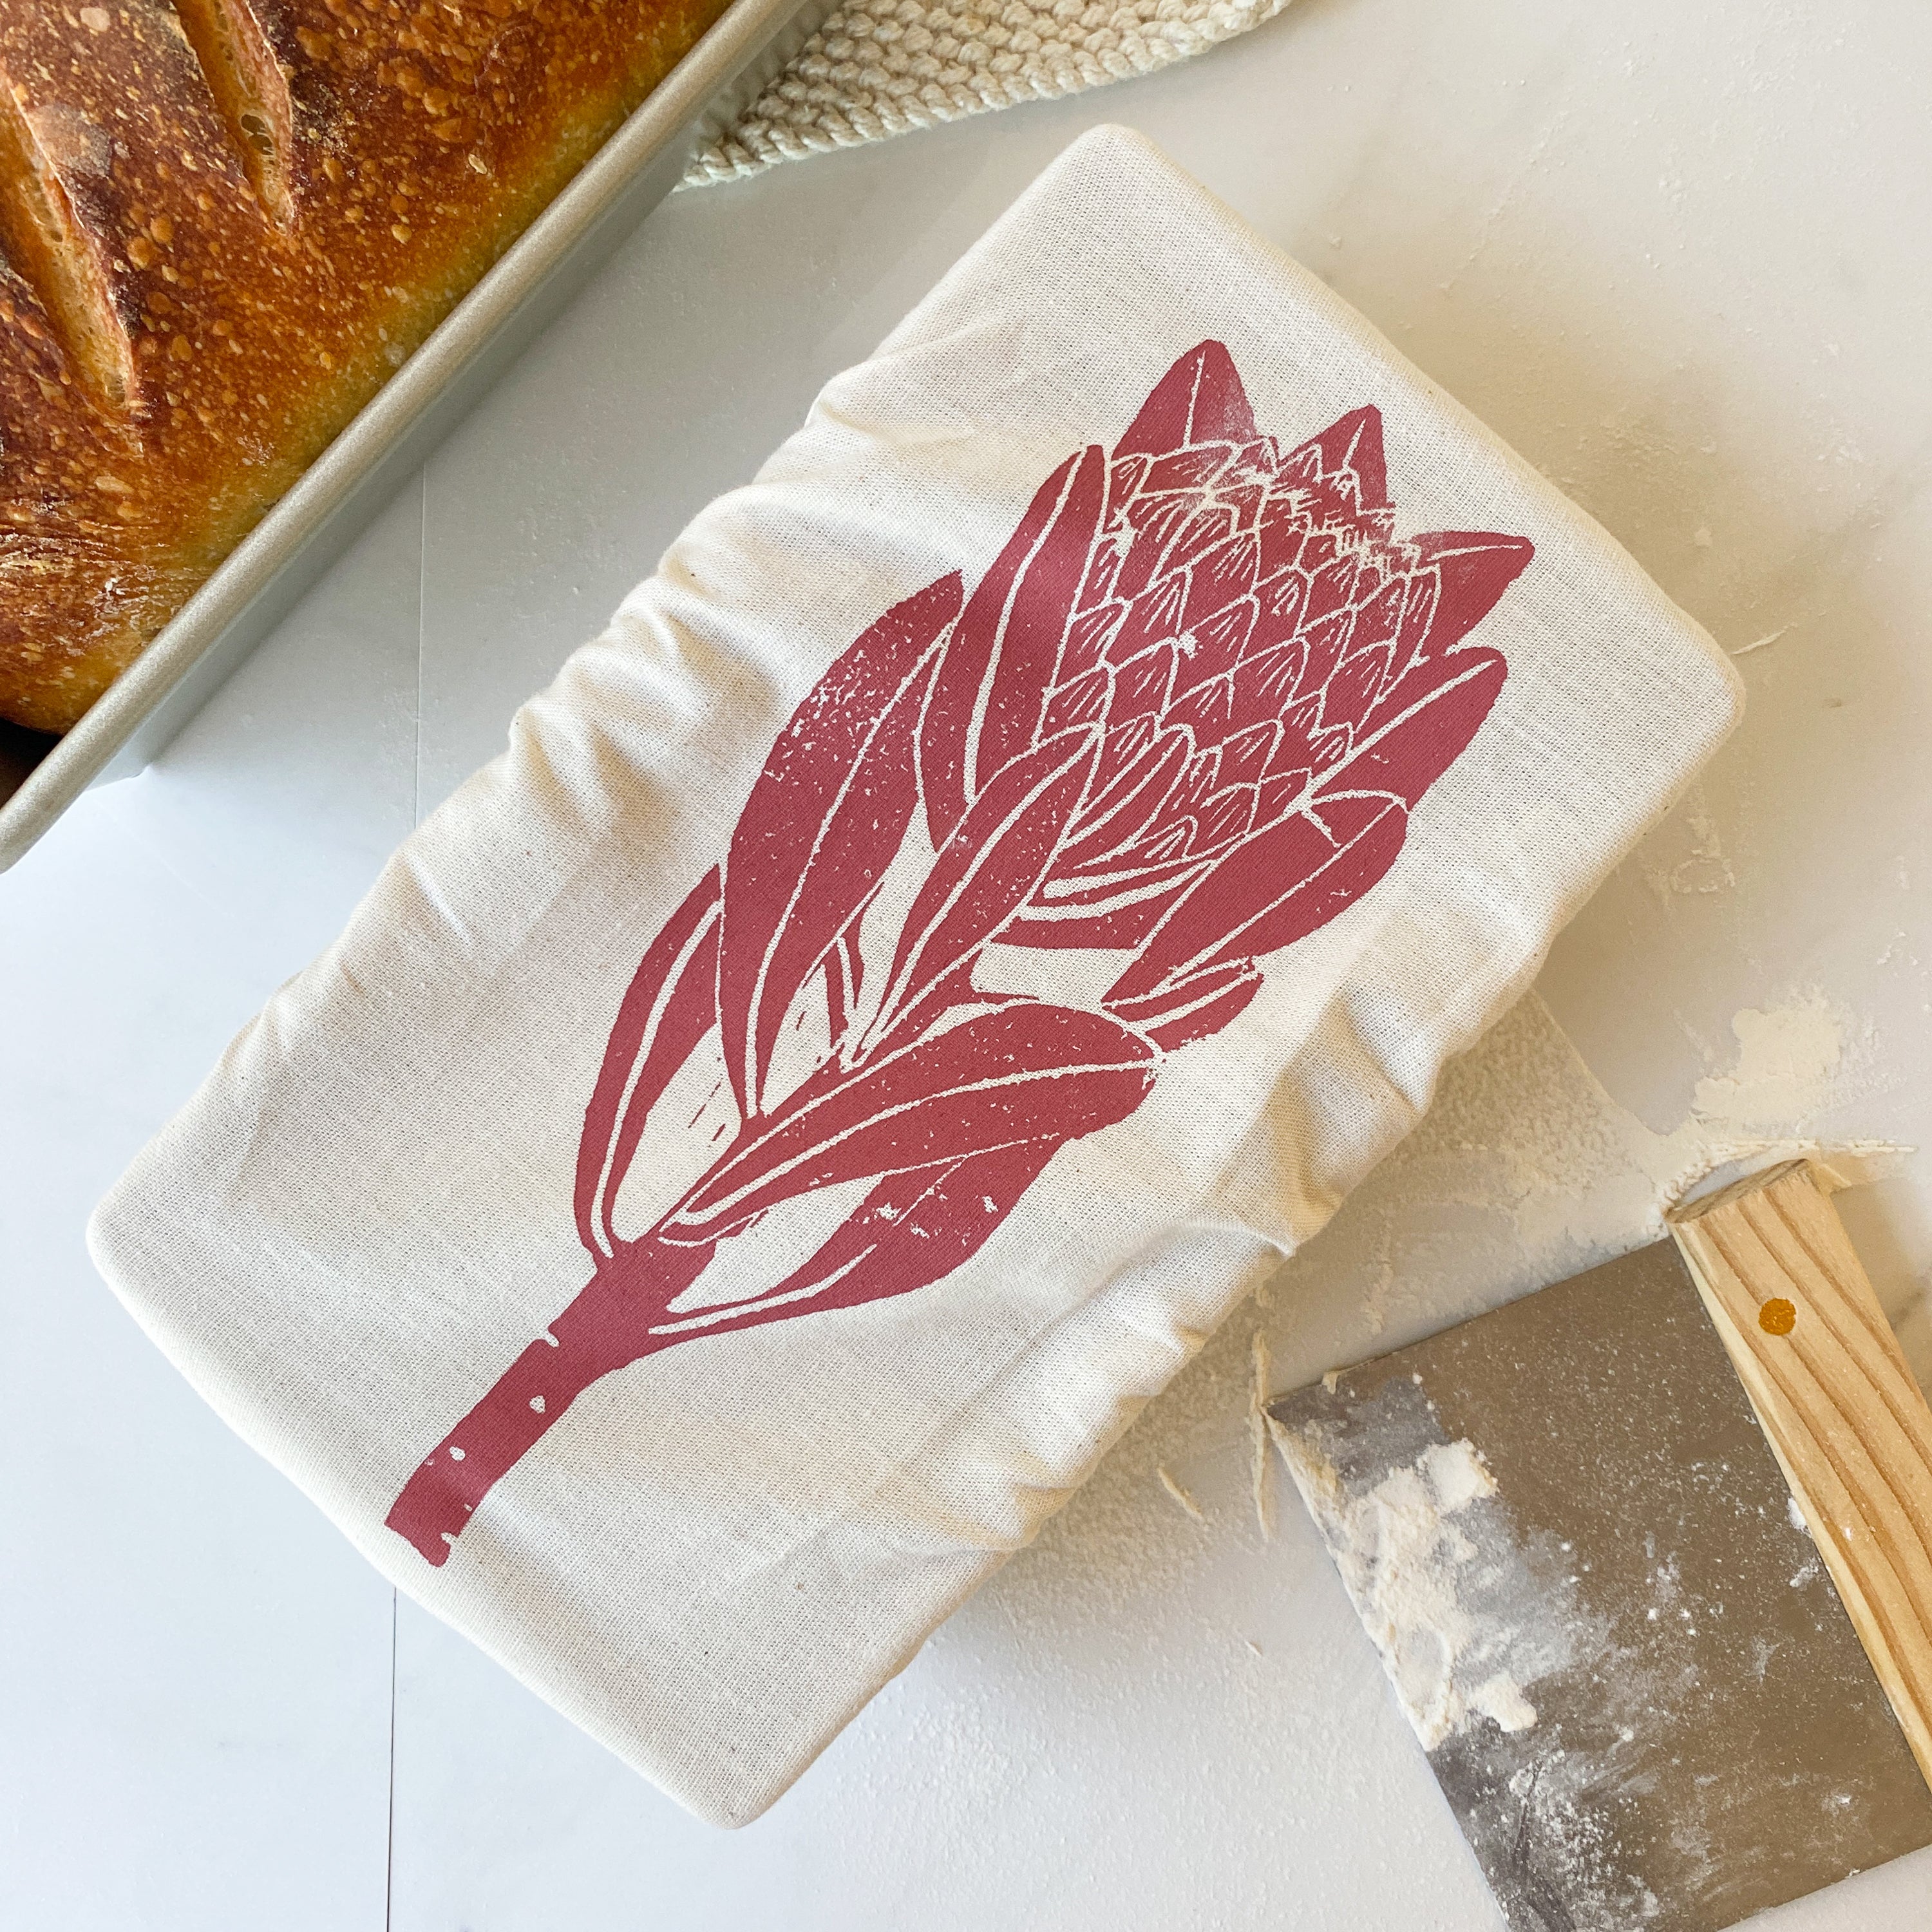 Loaf Bread Pan Cover | for bread making